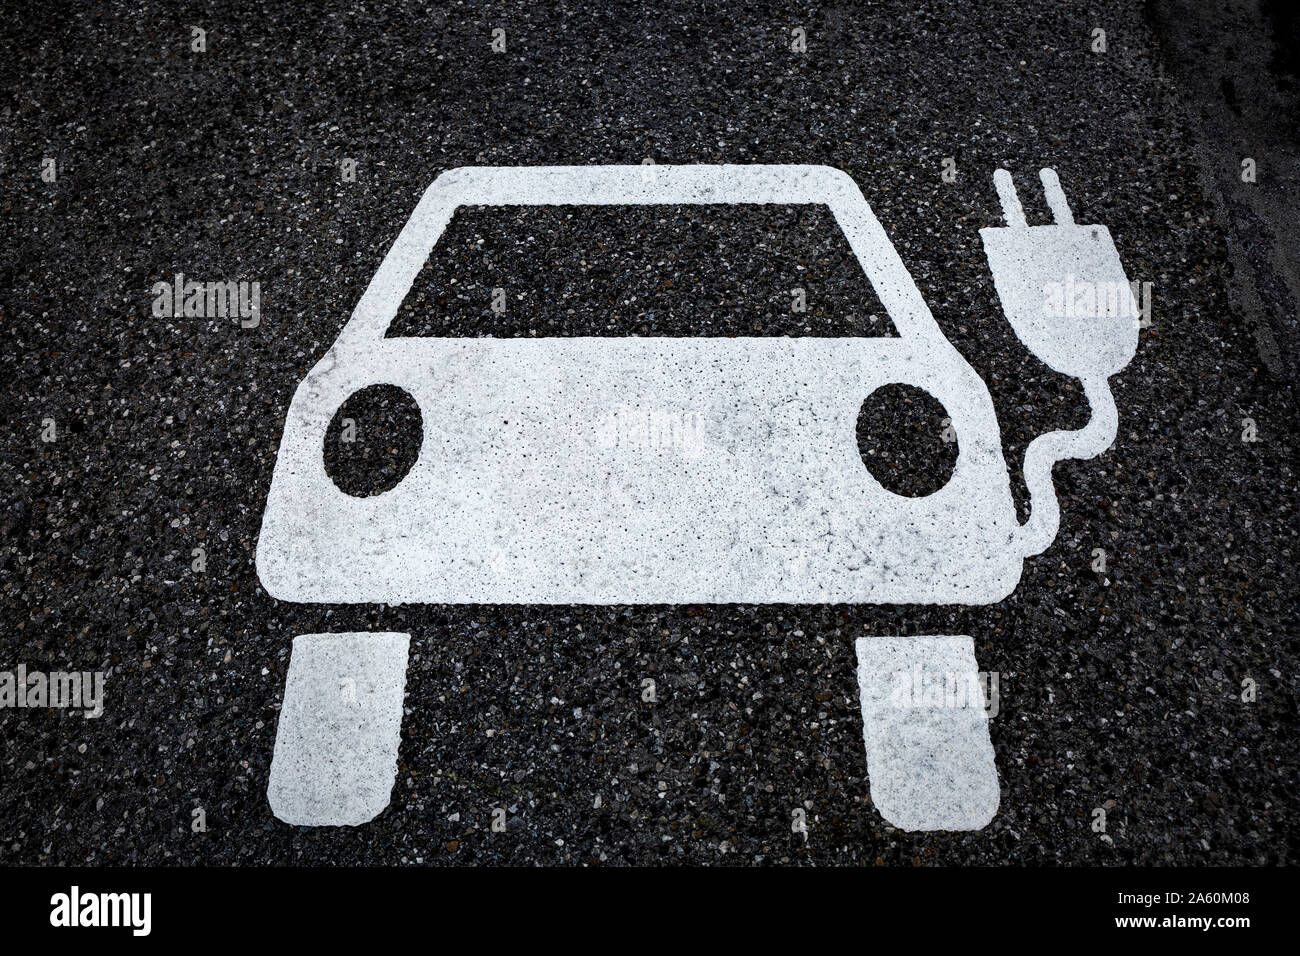 Symbol for a charging ststion for electric vehicles on tarmac Stock Photo